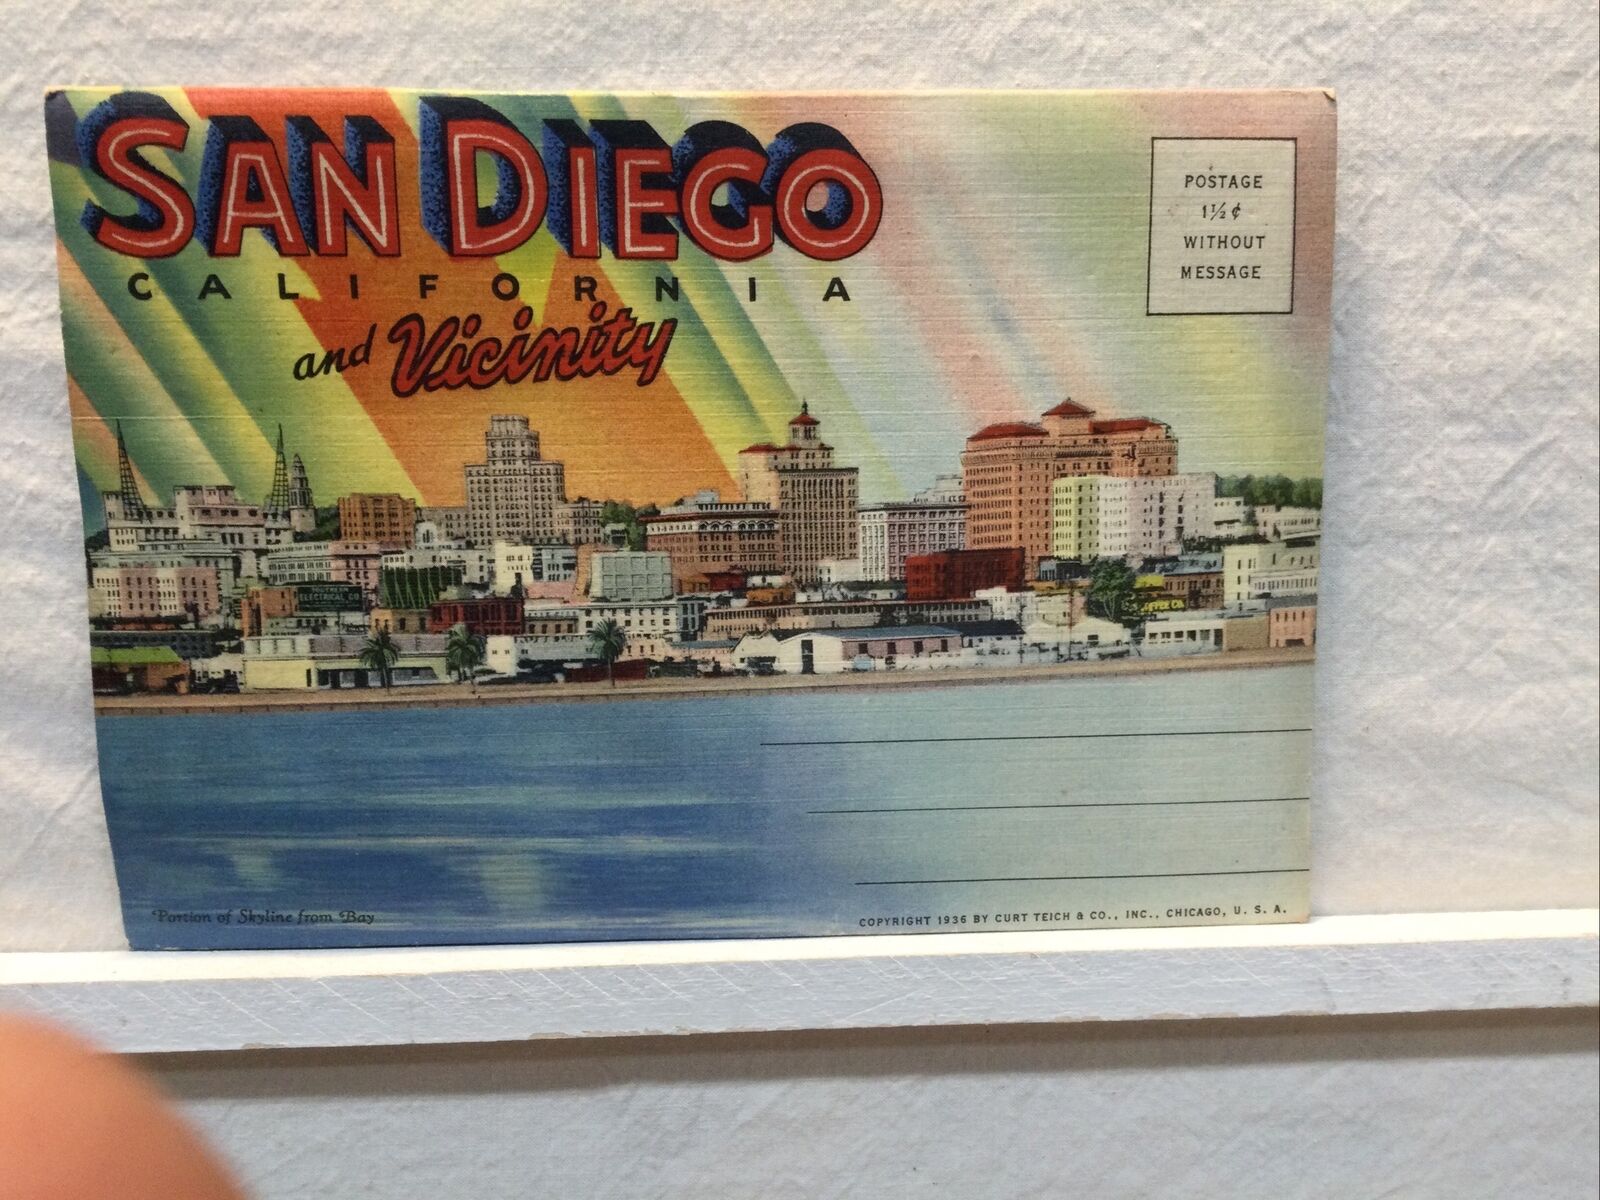 Rare 1936 Curt Teich & Co Linen Postcard Booklet of San Diego and Vicinity